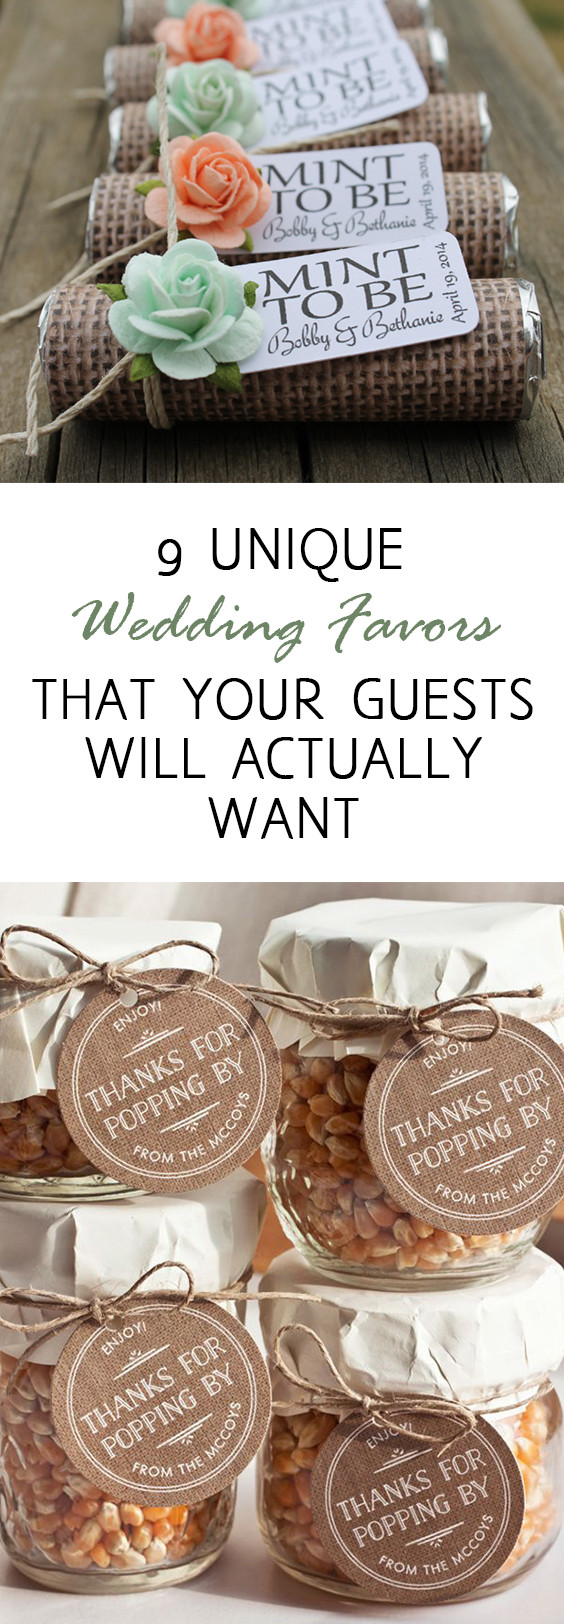 Cheap Wedding Favor Ideas
 9 Unique Wedding Favors that Your Guests Will Actually